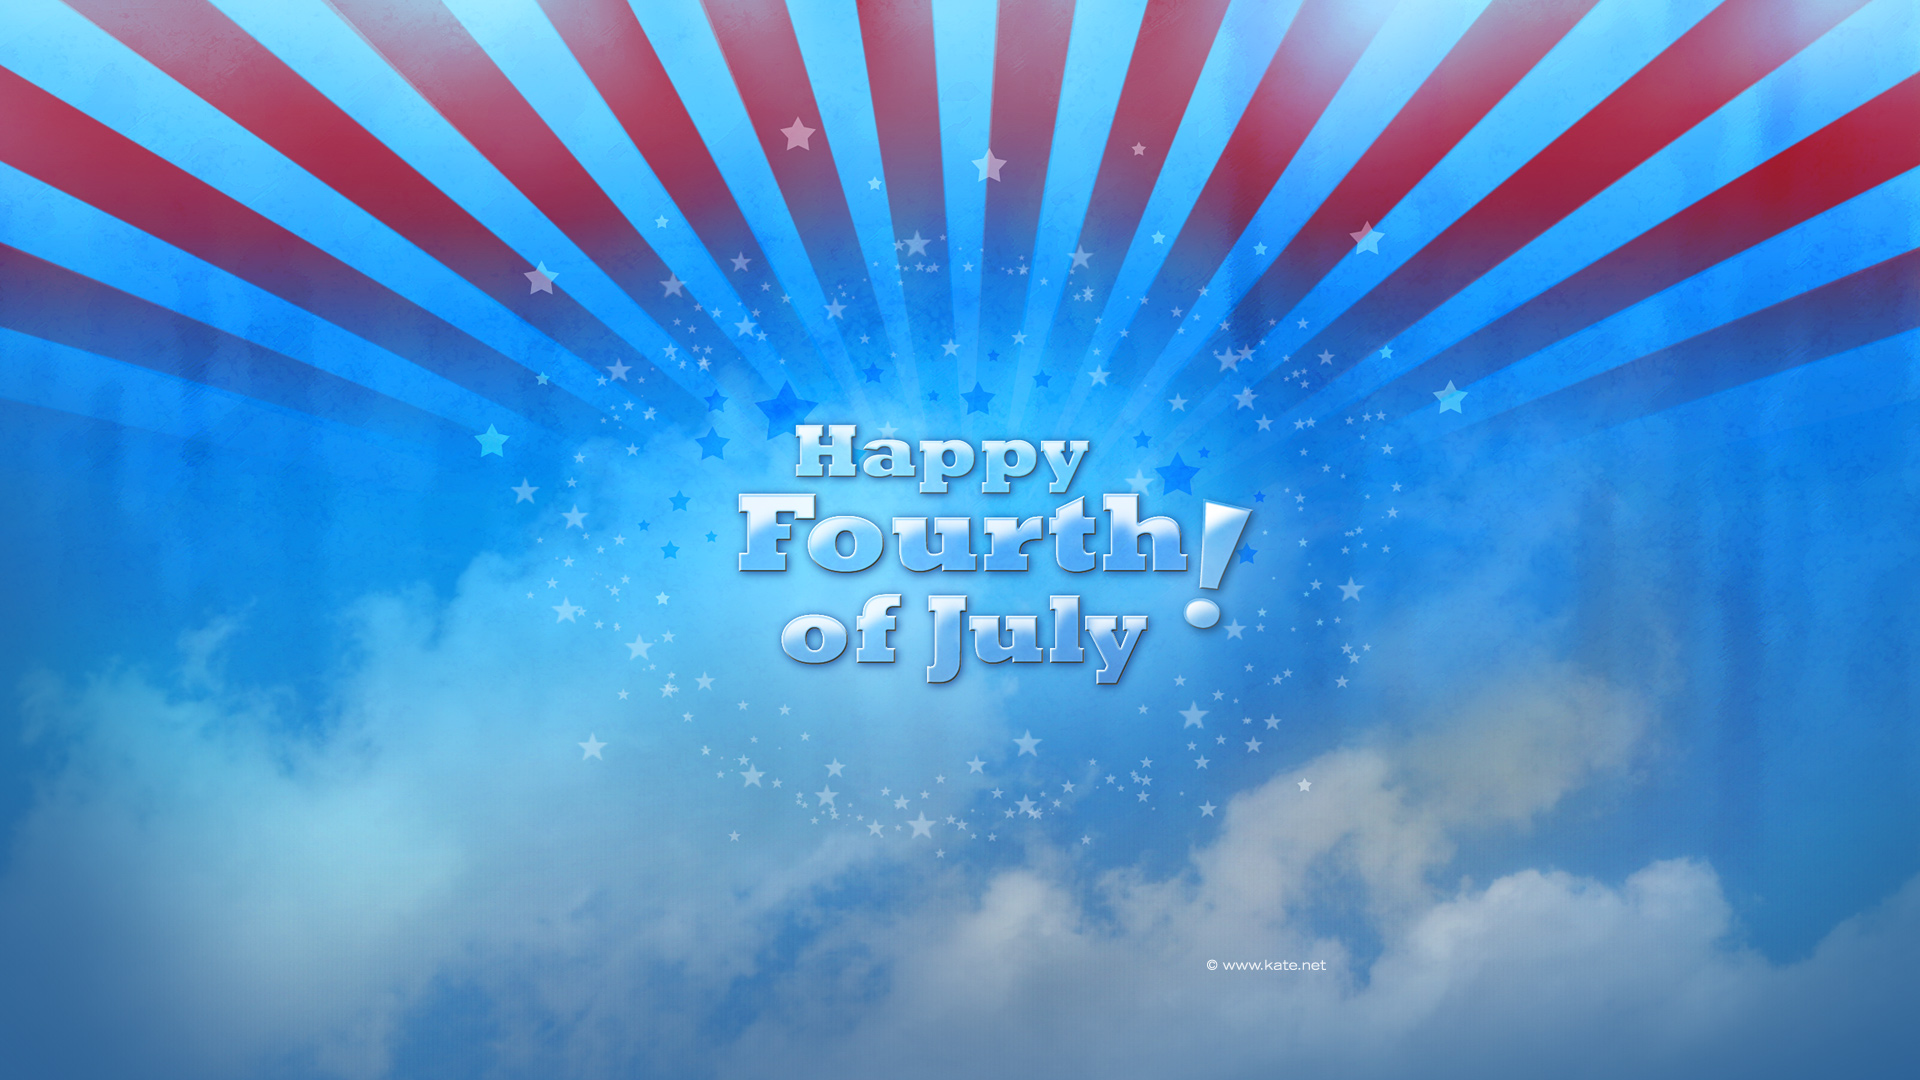 Fourth Of July Wallpapers Fourth Of July Backgrounds By Katenet